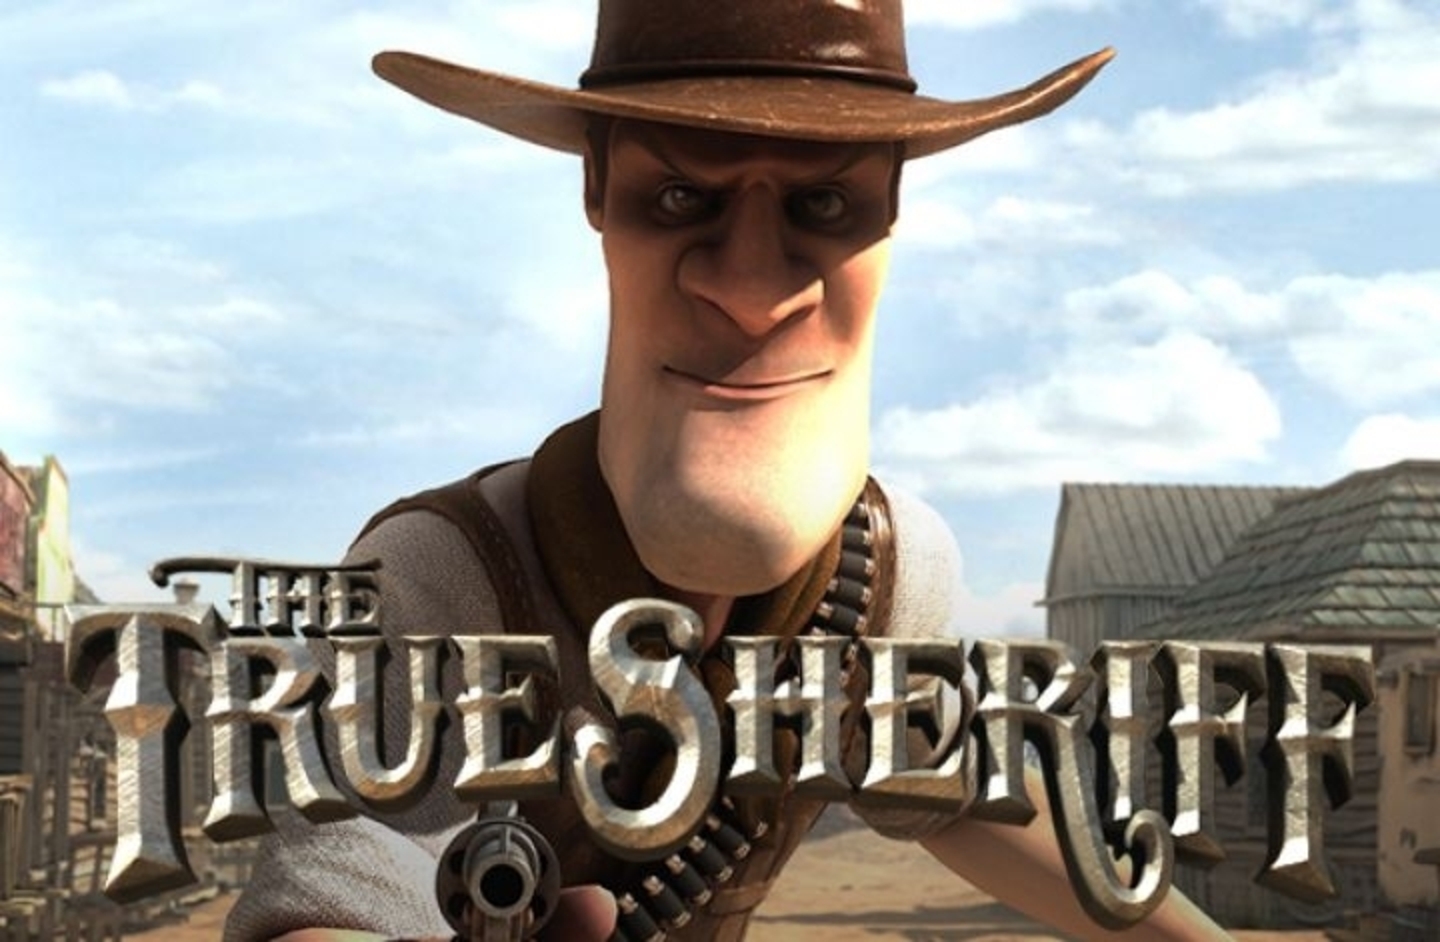 The True Sheriff Online Slot Demo Game by Betsoft